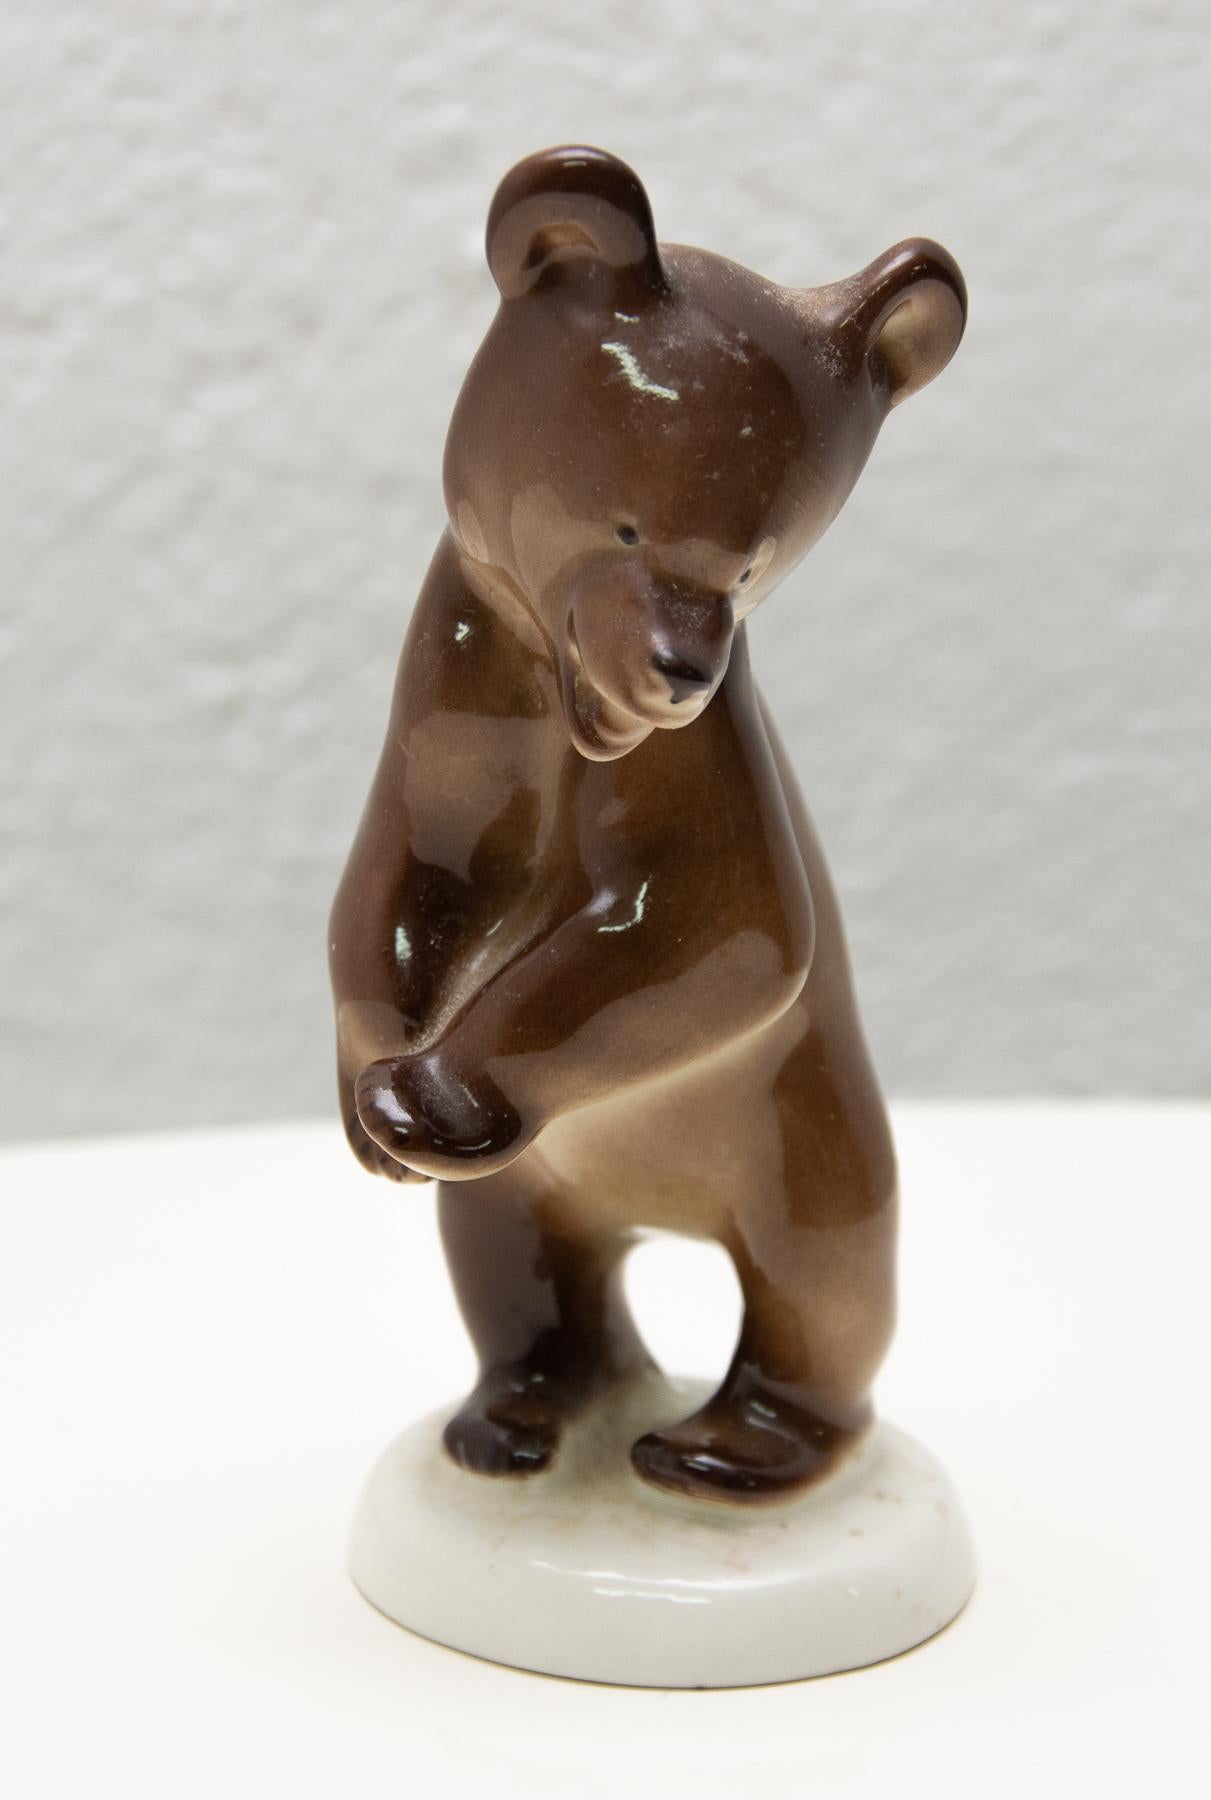 Ceramic sculpture of a bear, made by Lomonosov company in the former USSR in the 1970s. The sculpture is made of ceramics.
The statuette is in very good Vintage condition.